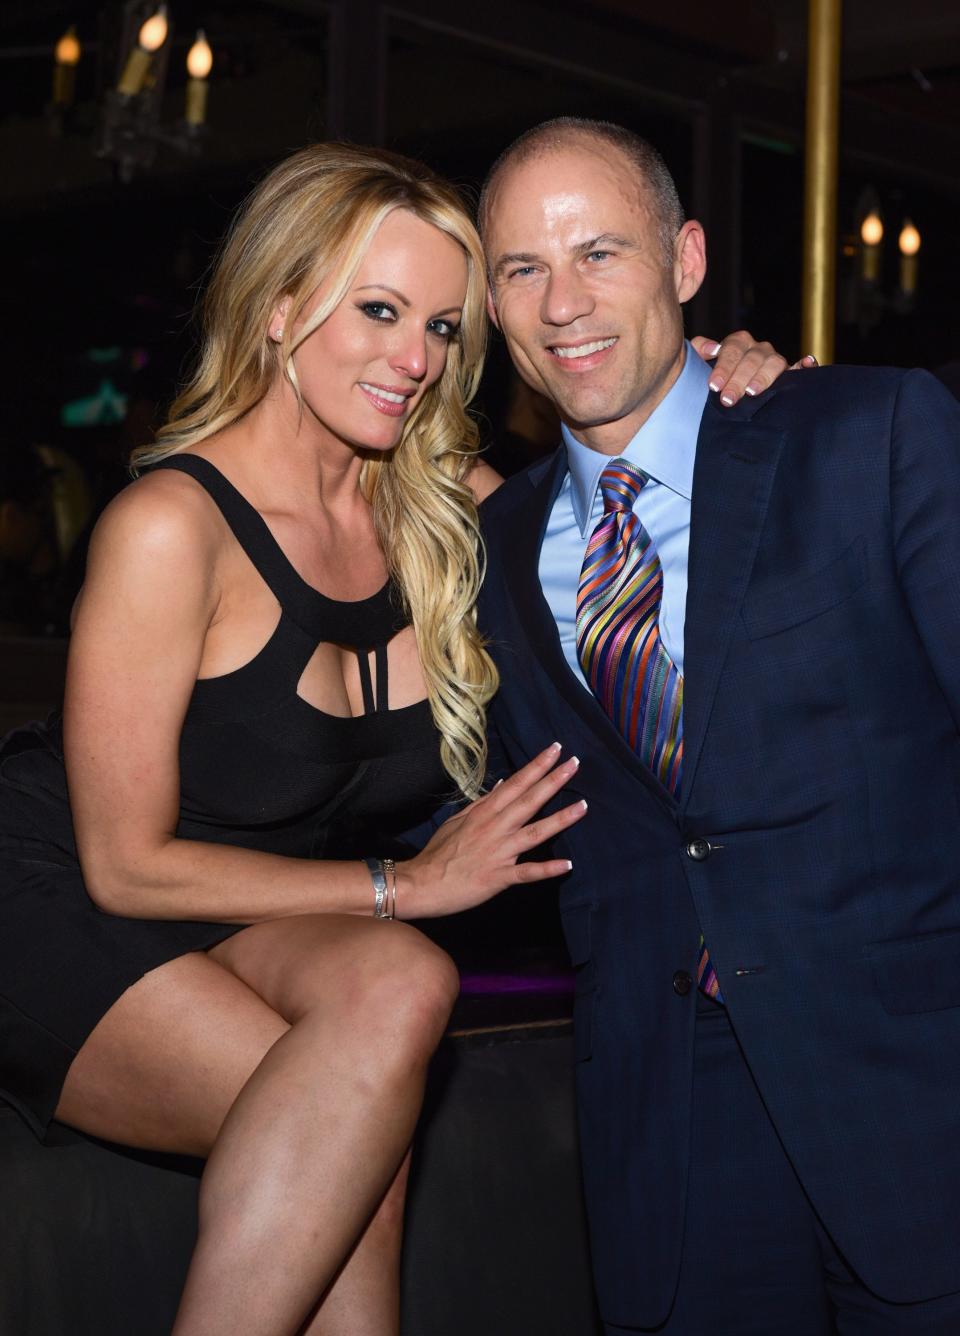 WEST HOLLYWOOD, CA - MAY 23: Stormy Daniels and attorney Michael Avenatti are seen at The Abbey on May 23, 2018 in West Hollywood, California. (Photo by Tara Ziemba/Getty Images)